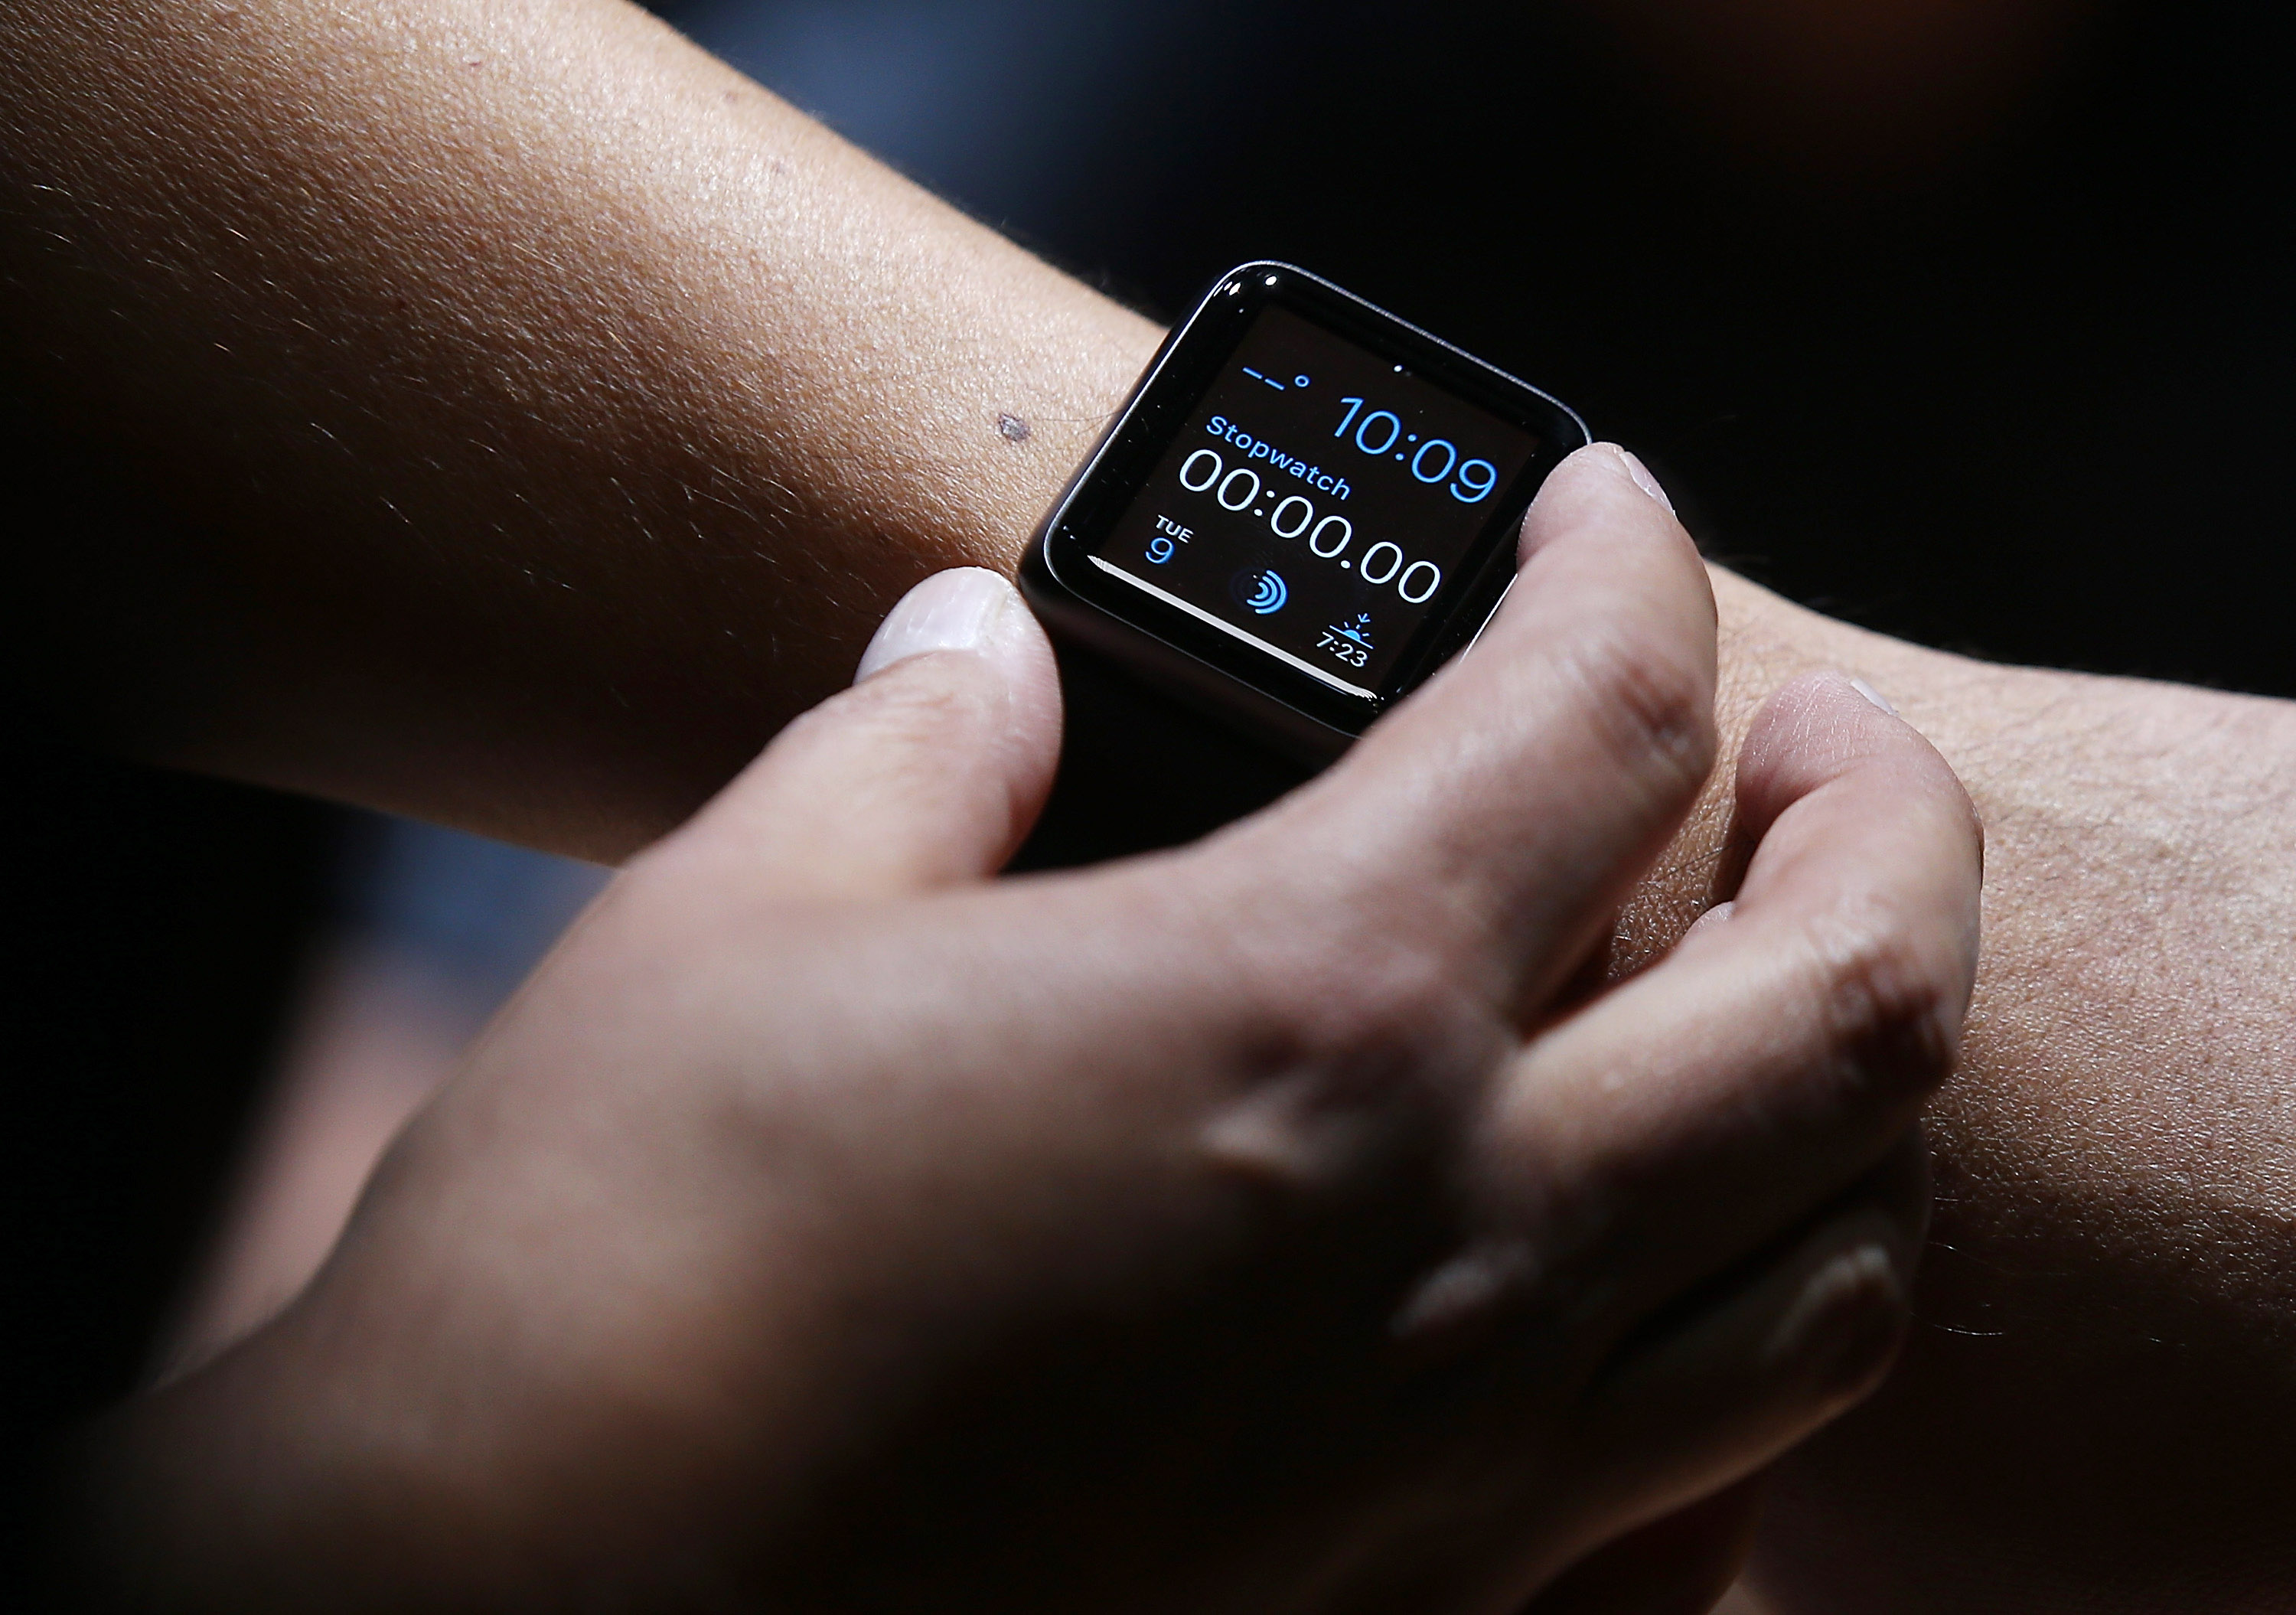 An attendee inspects the new Apple Watch during an Apple special event at the Flint Center for the Performing Arts on September 9, 2014 in Cupertino, California. (Justin Sullivan&mdash;Getty Images)